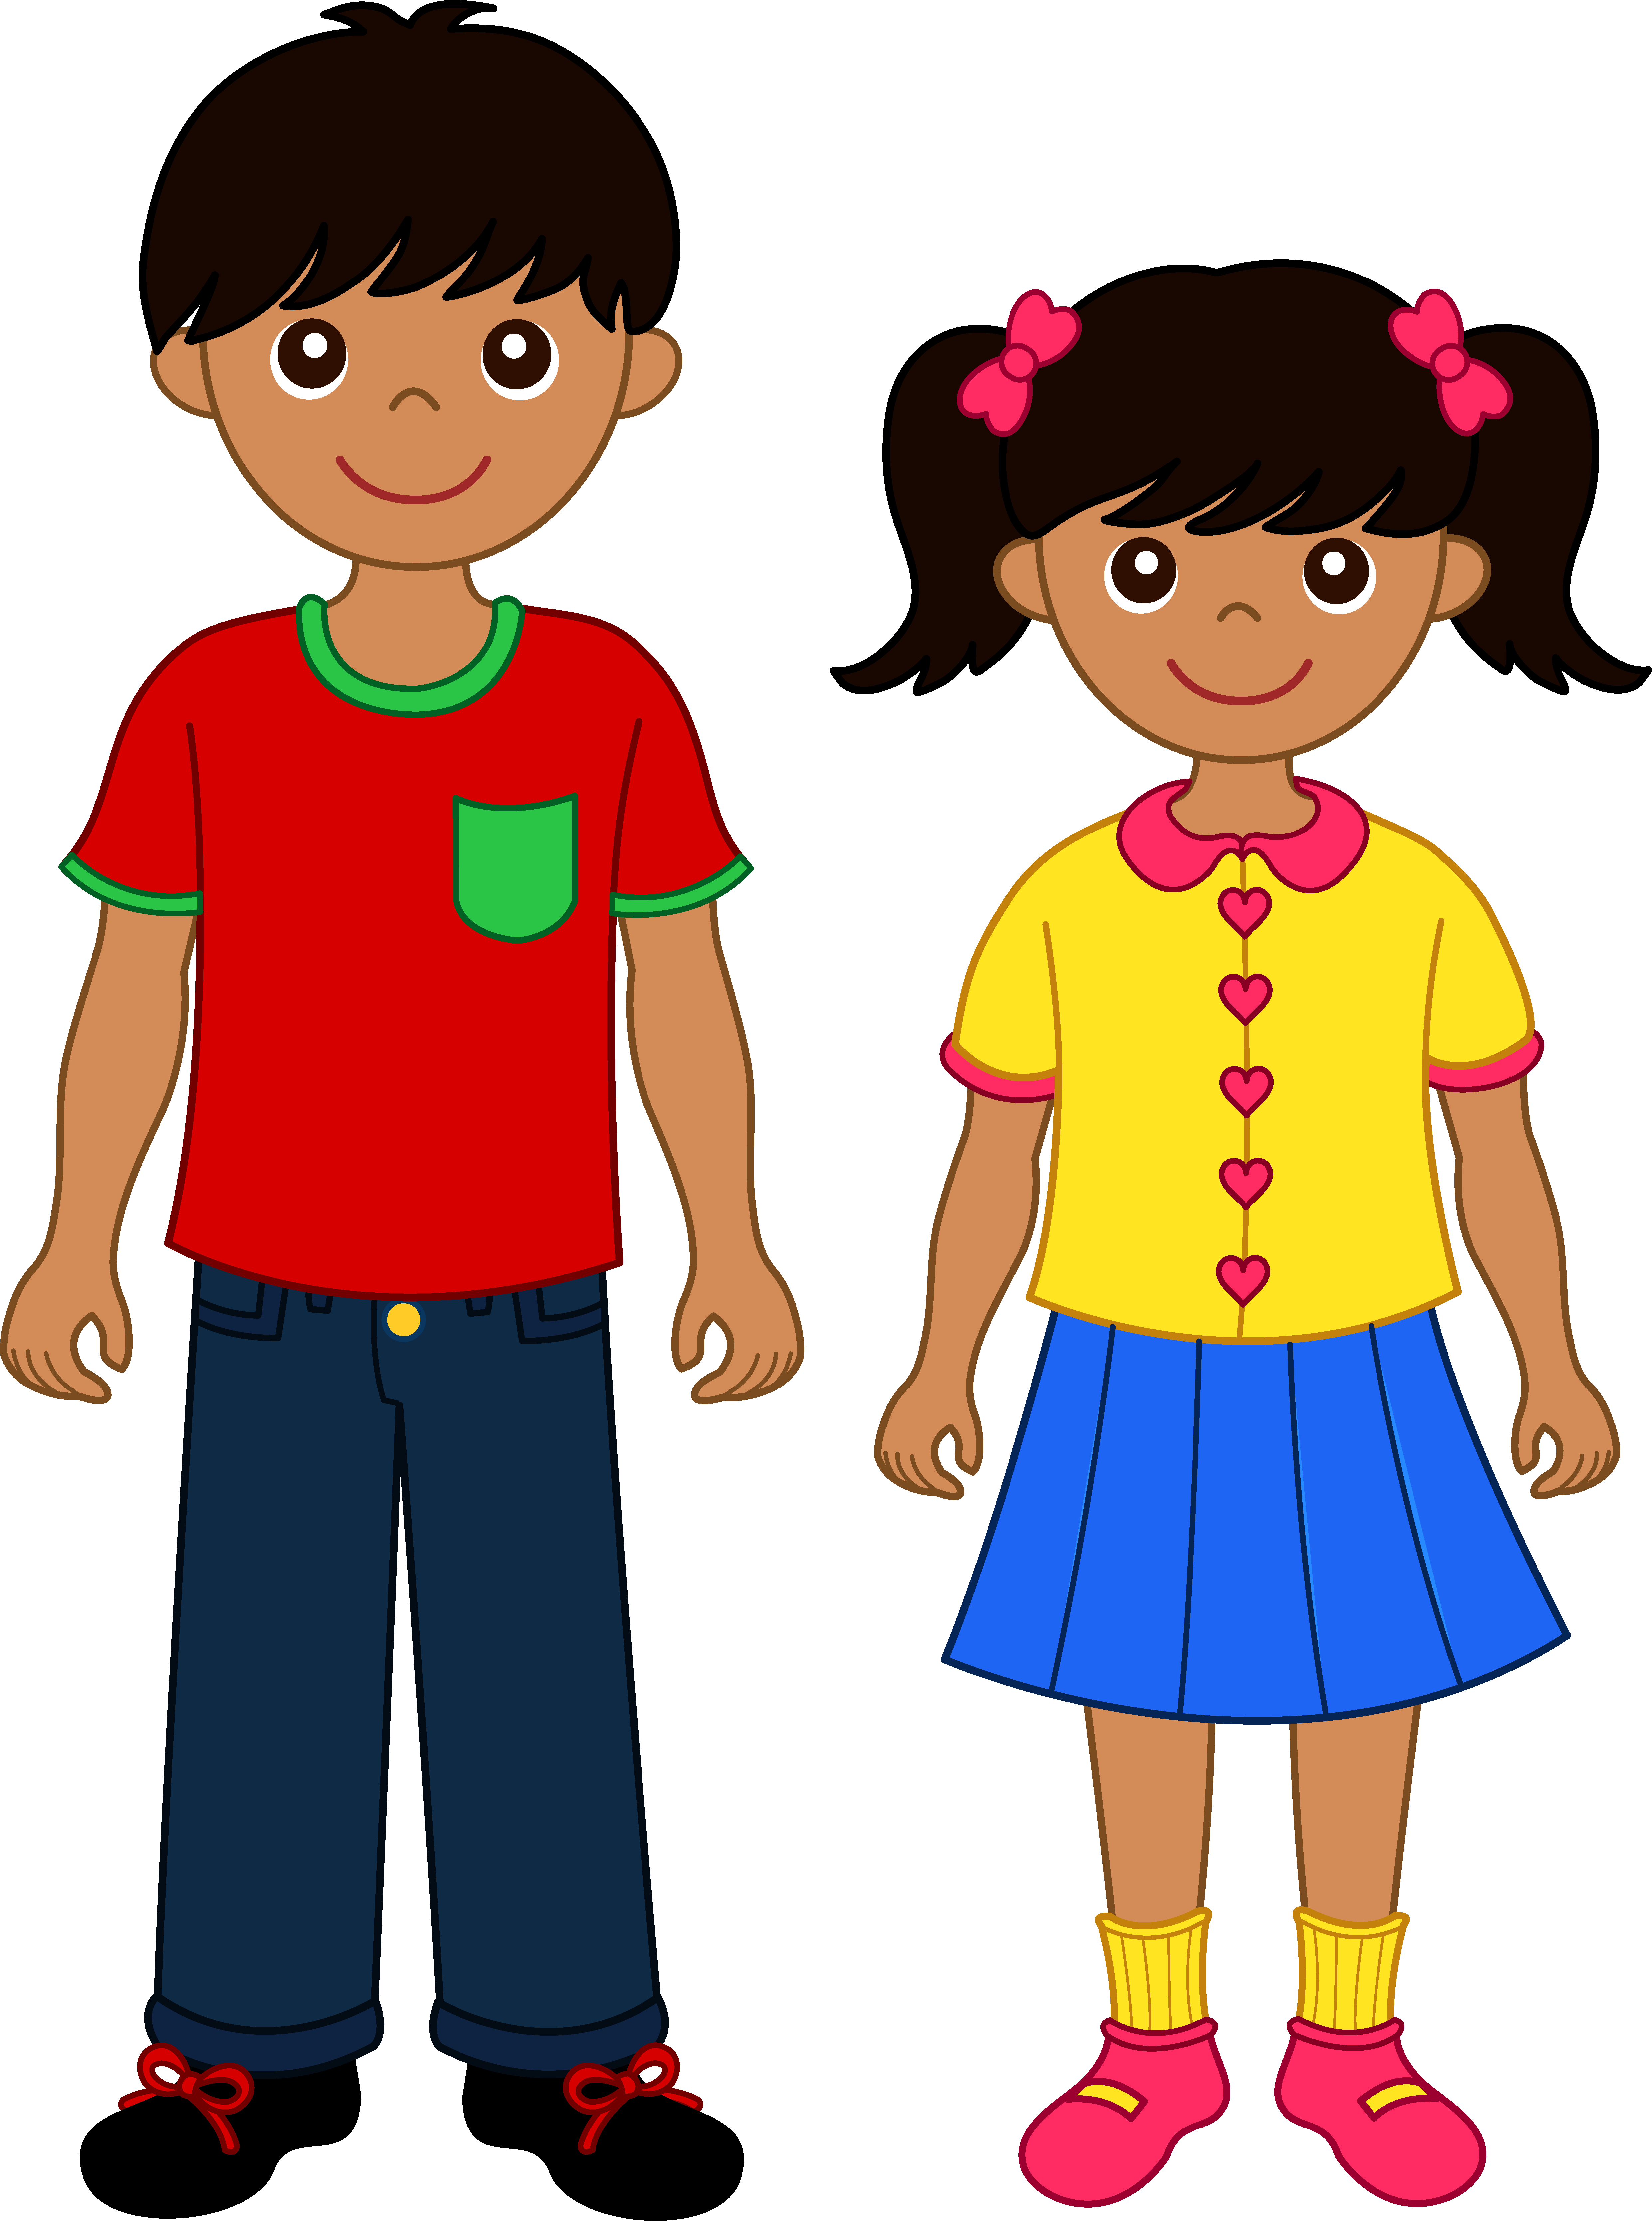 Brother and sister free. Grandparents clipart cartoon